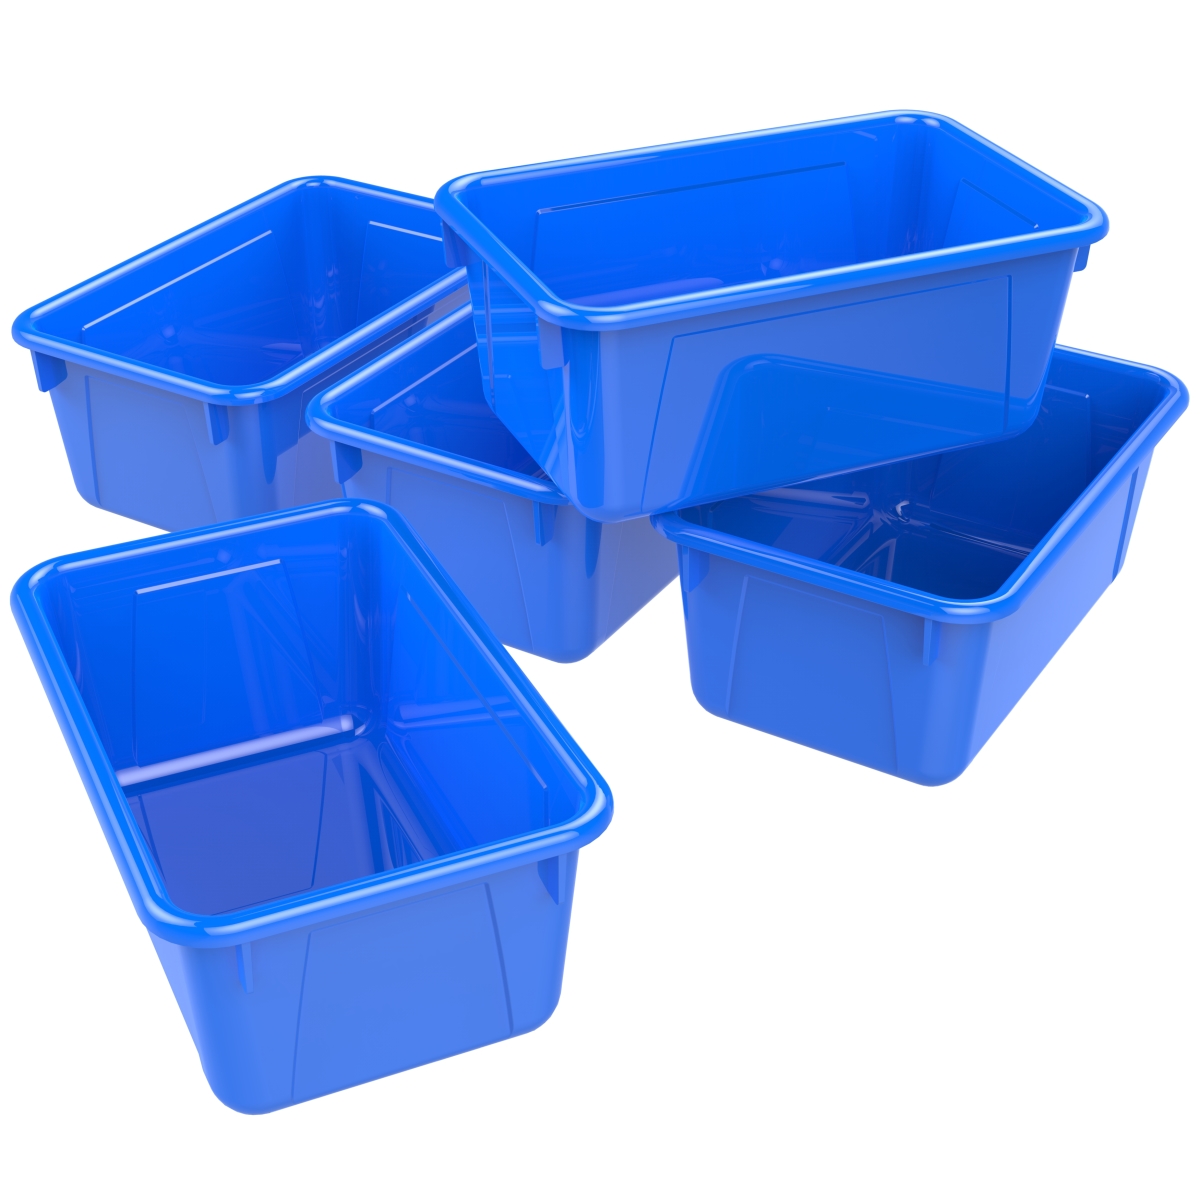 Classroom Small Cubby Bin, Blue - Pack Of 5